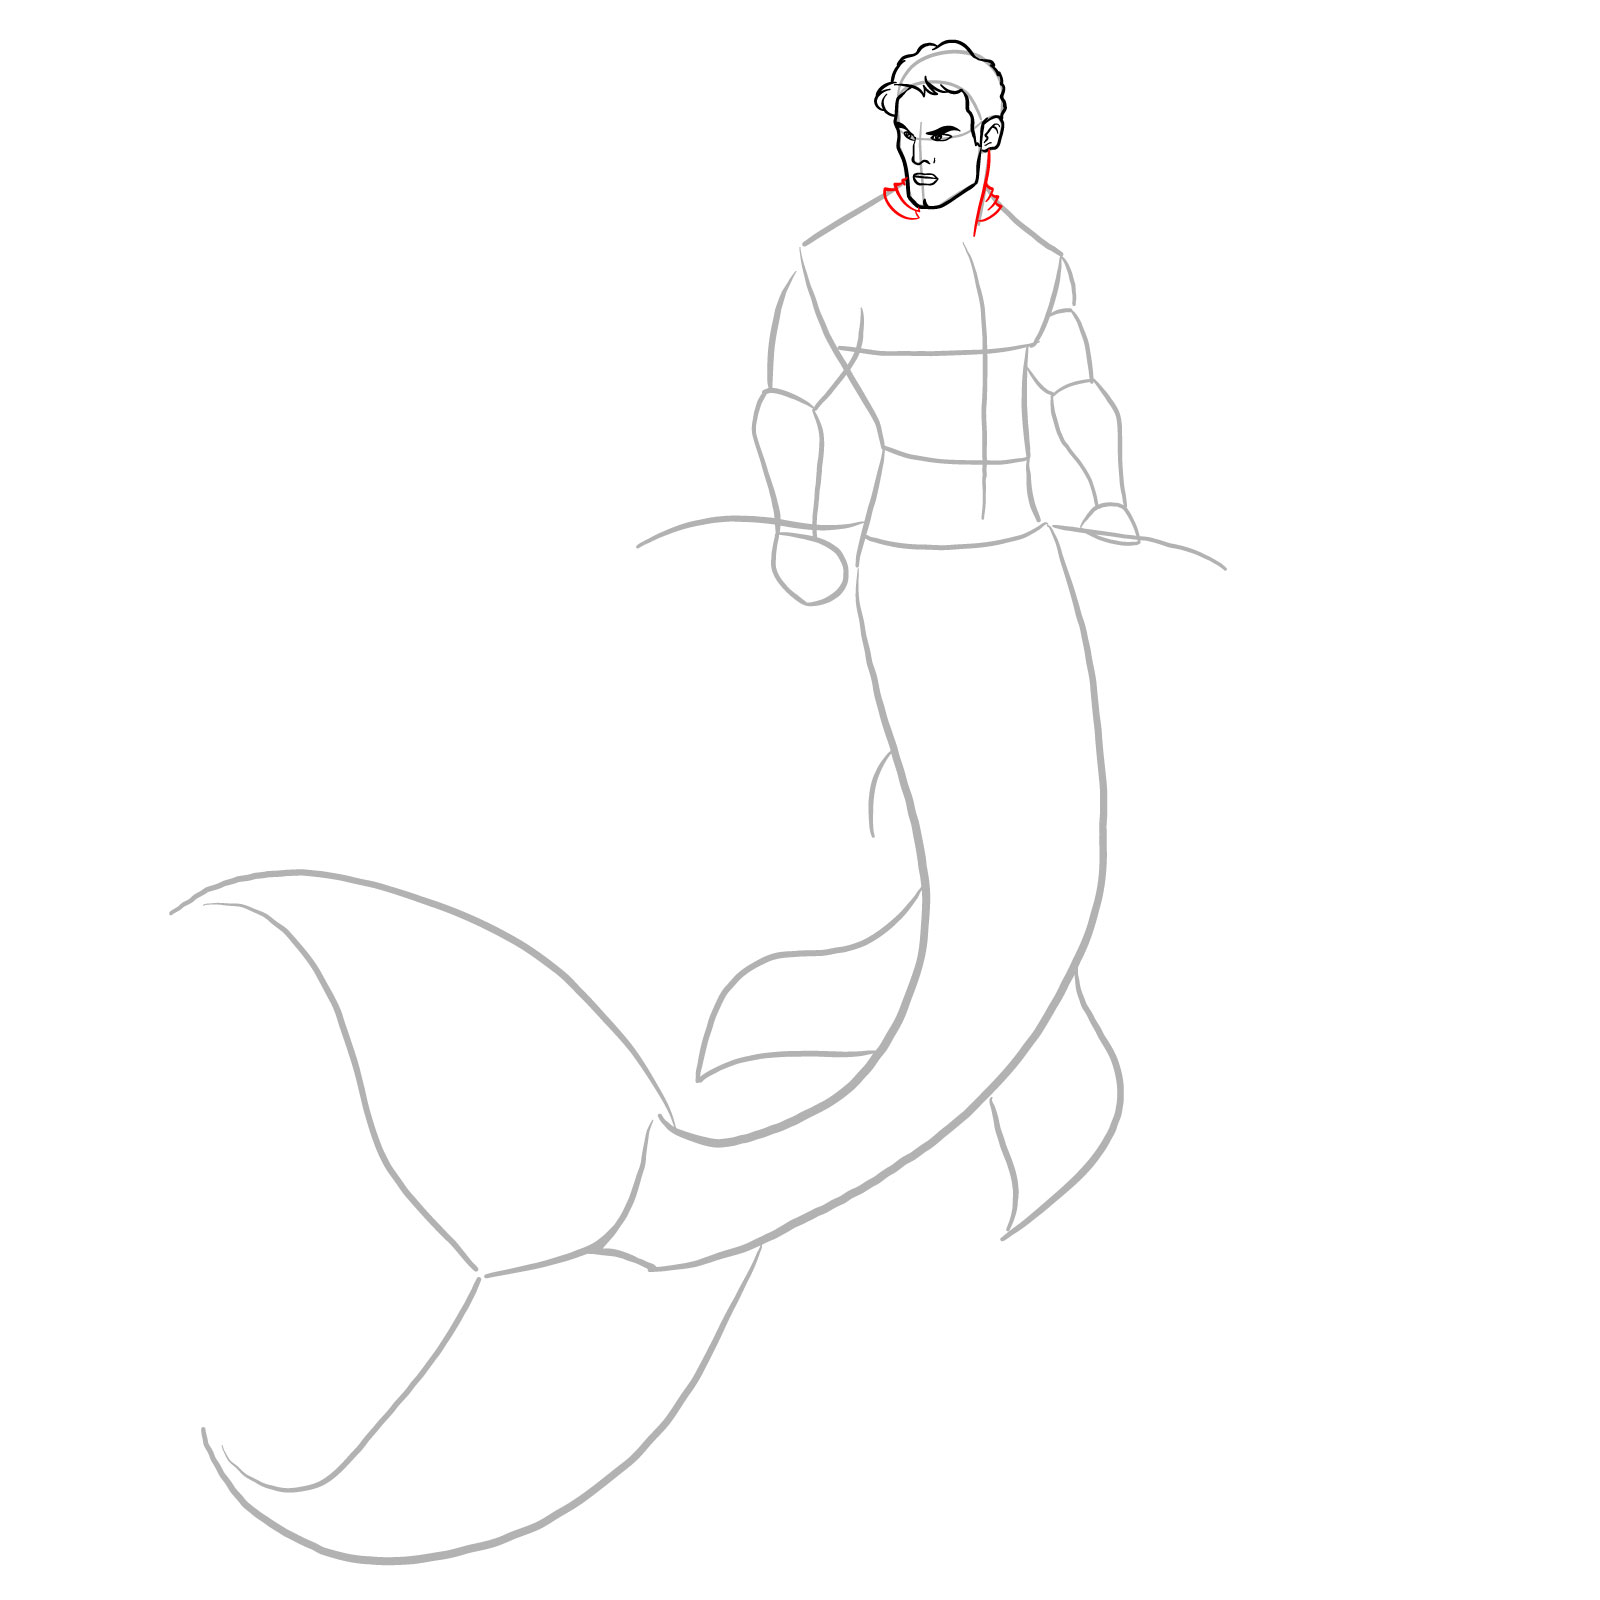 How to draw a Merman - step 11